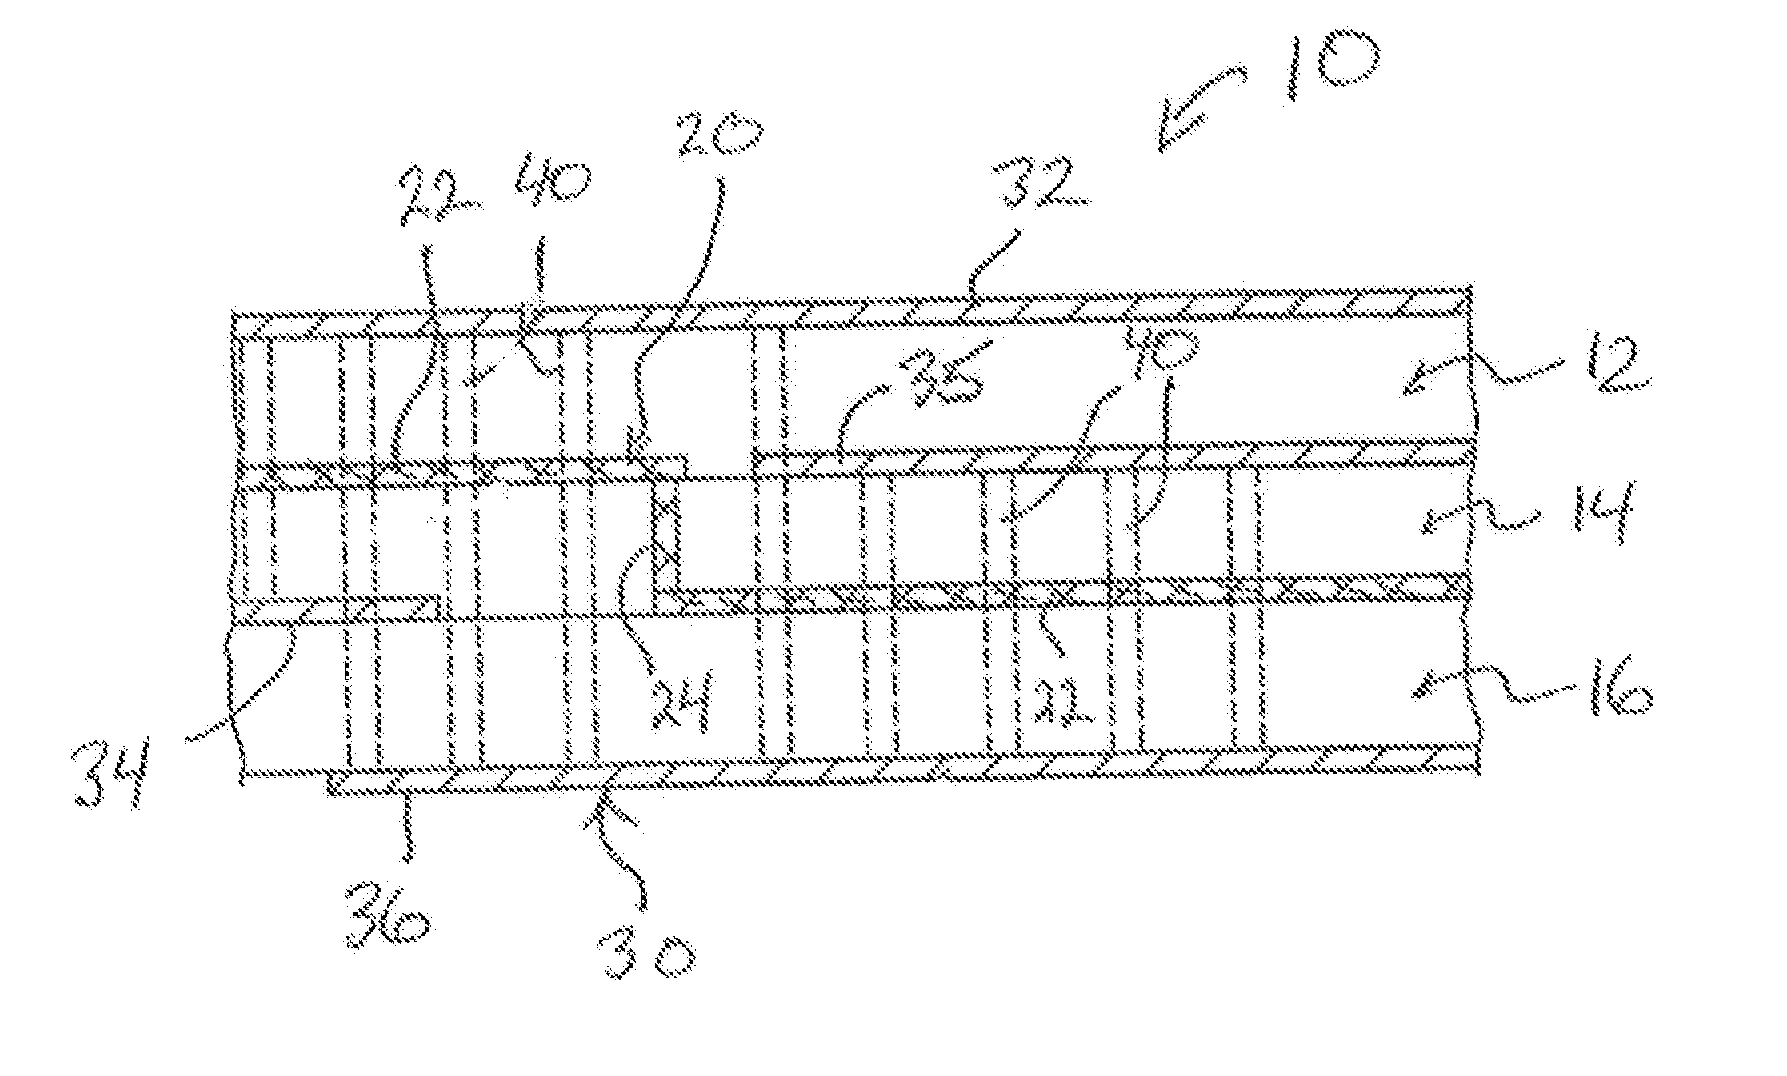 Shielded RF Transmission Lines in Low Temperature Co-fired Ceramic Constructs and Method of Making Same